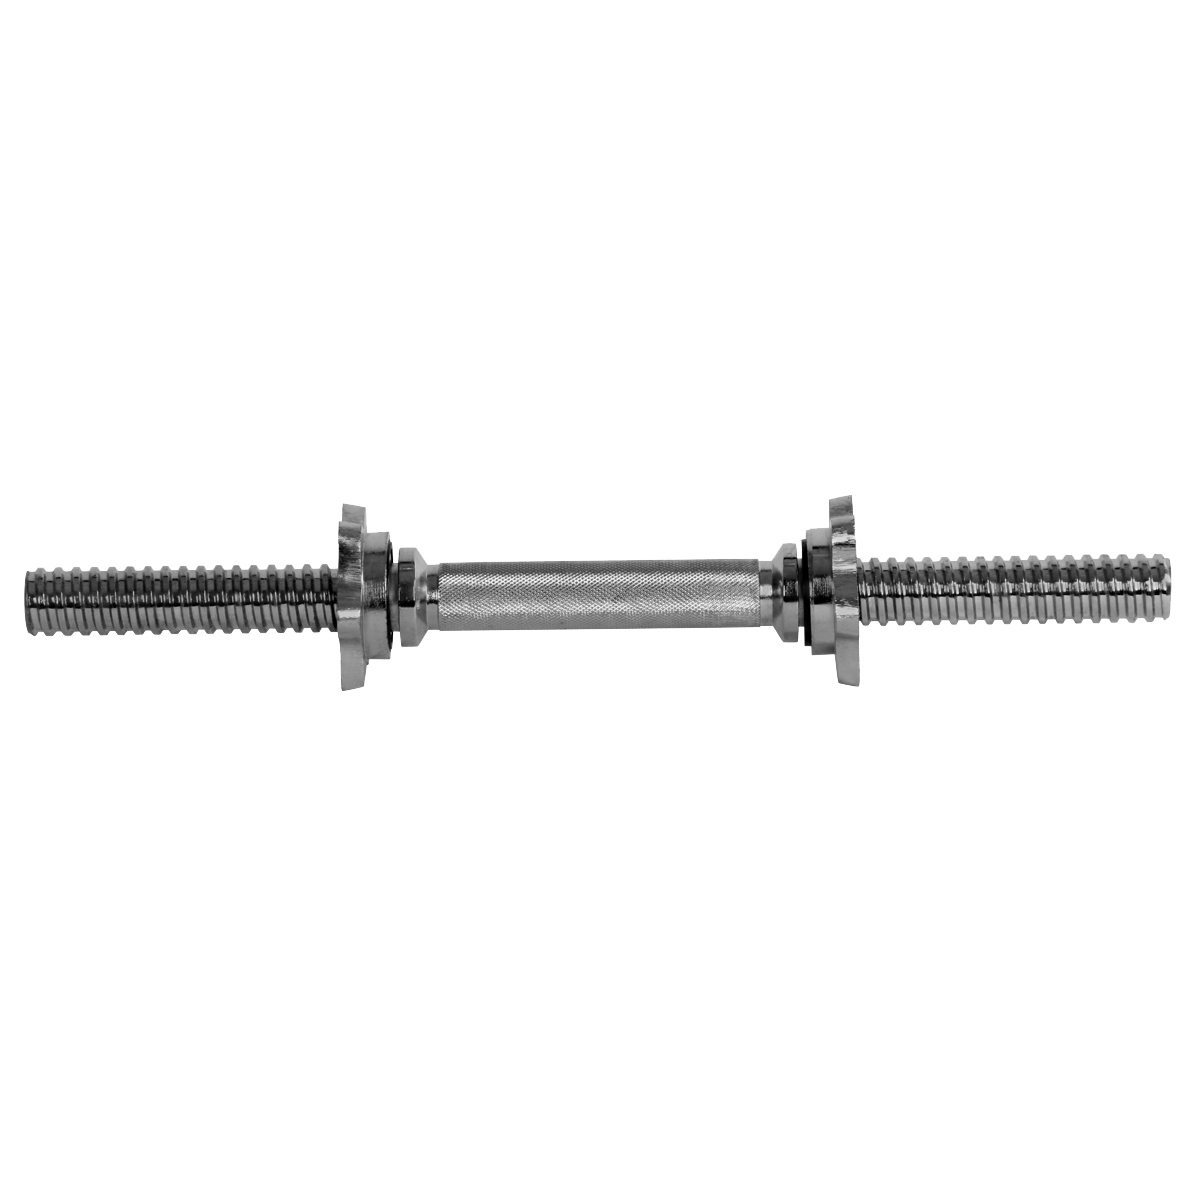 SDA - 16T/1 - Weight lifting bar - for loading